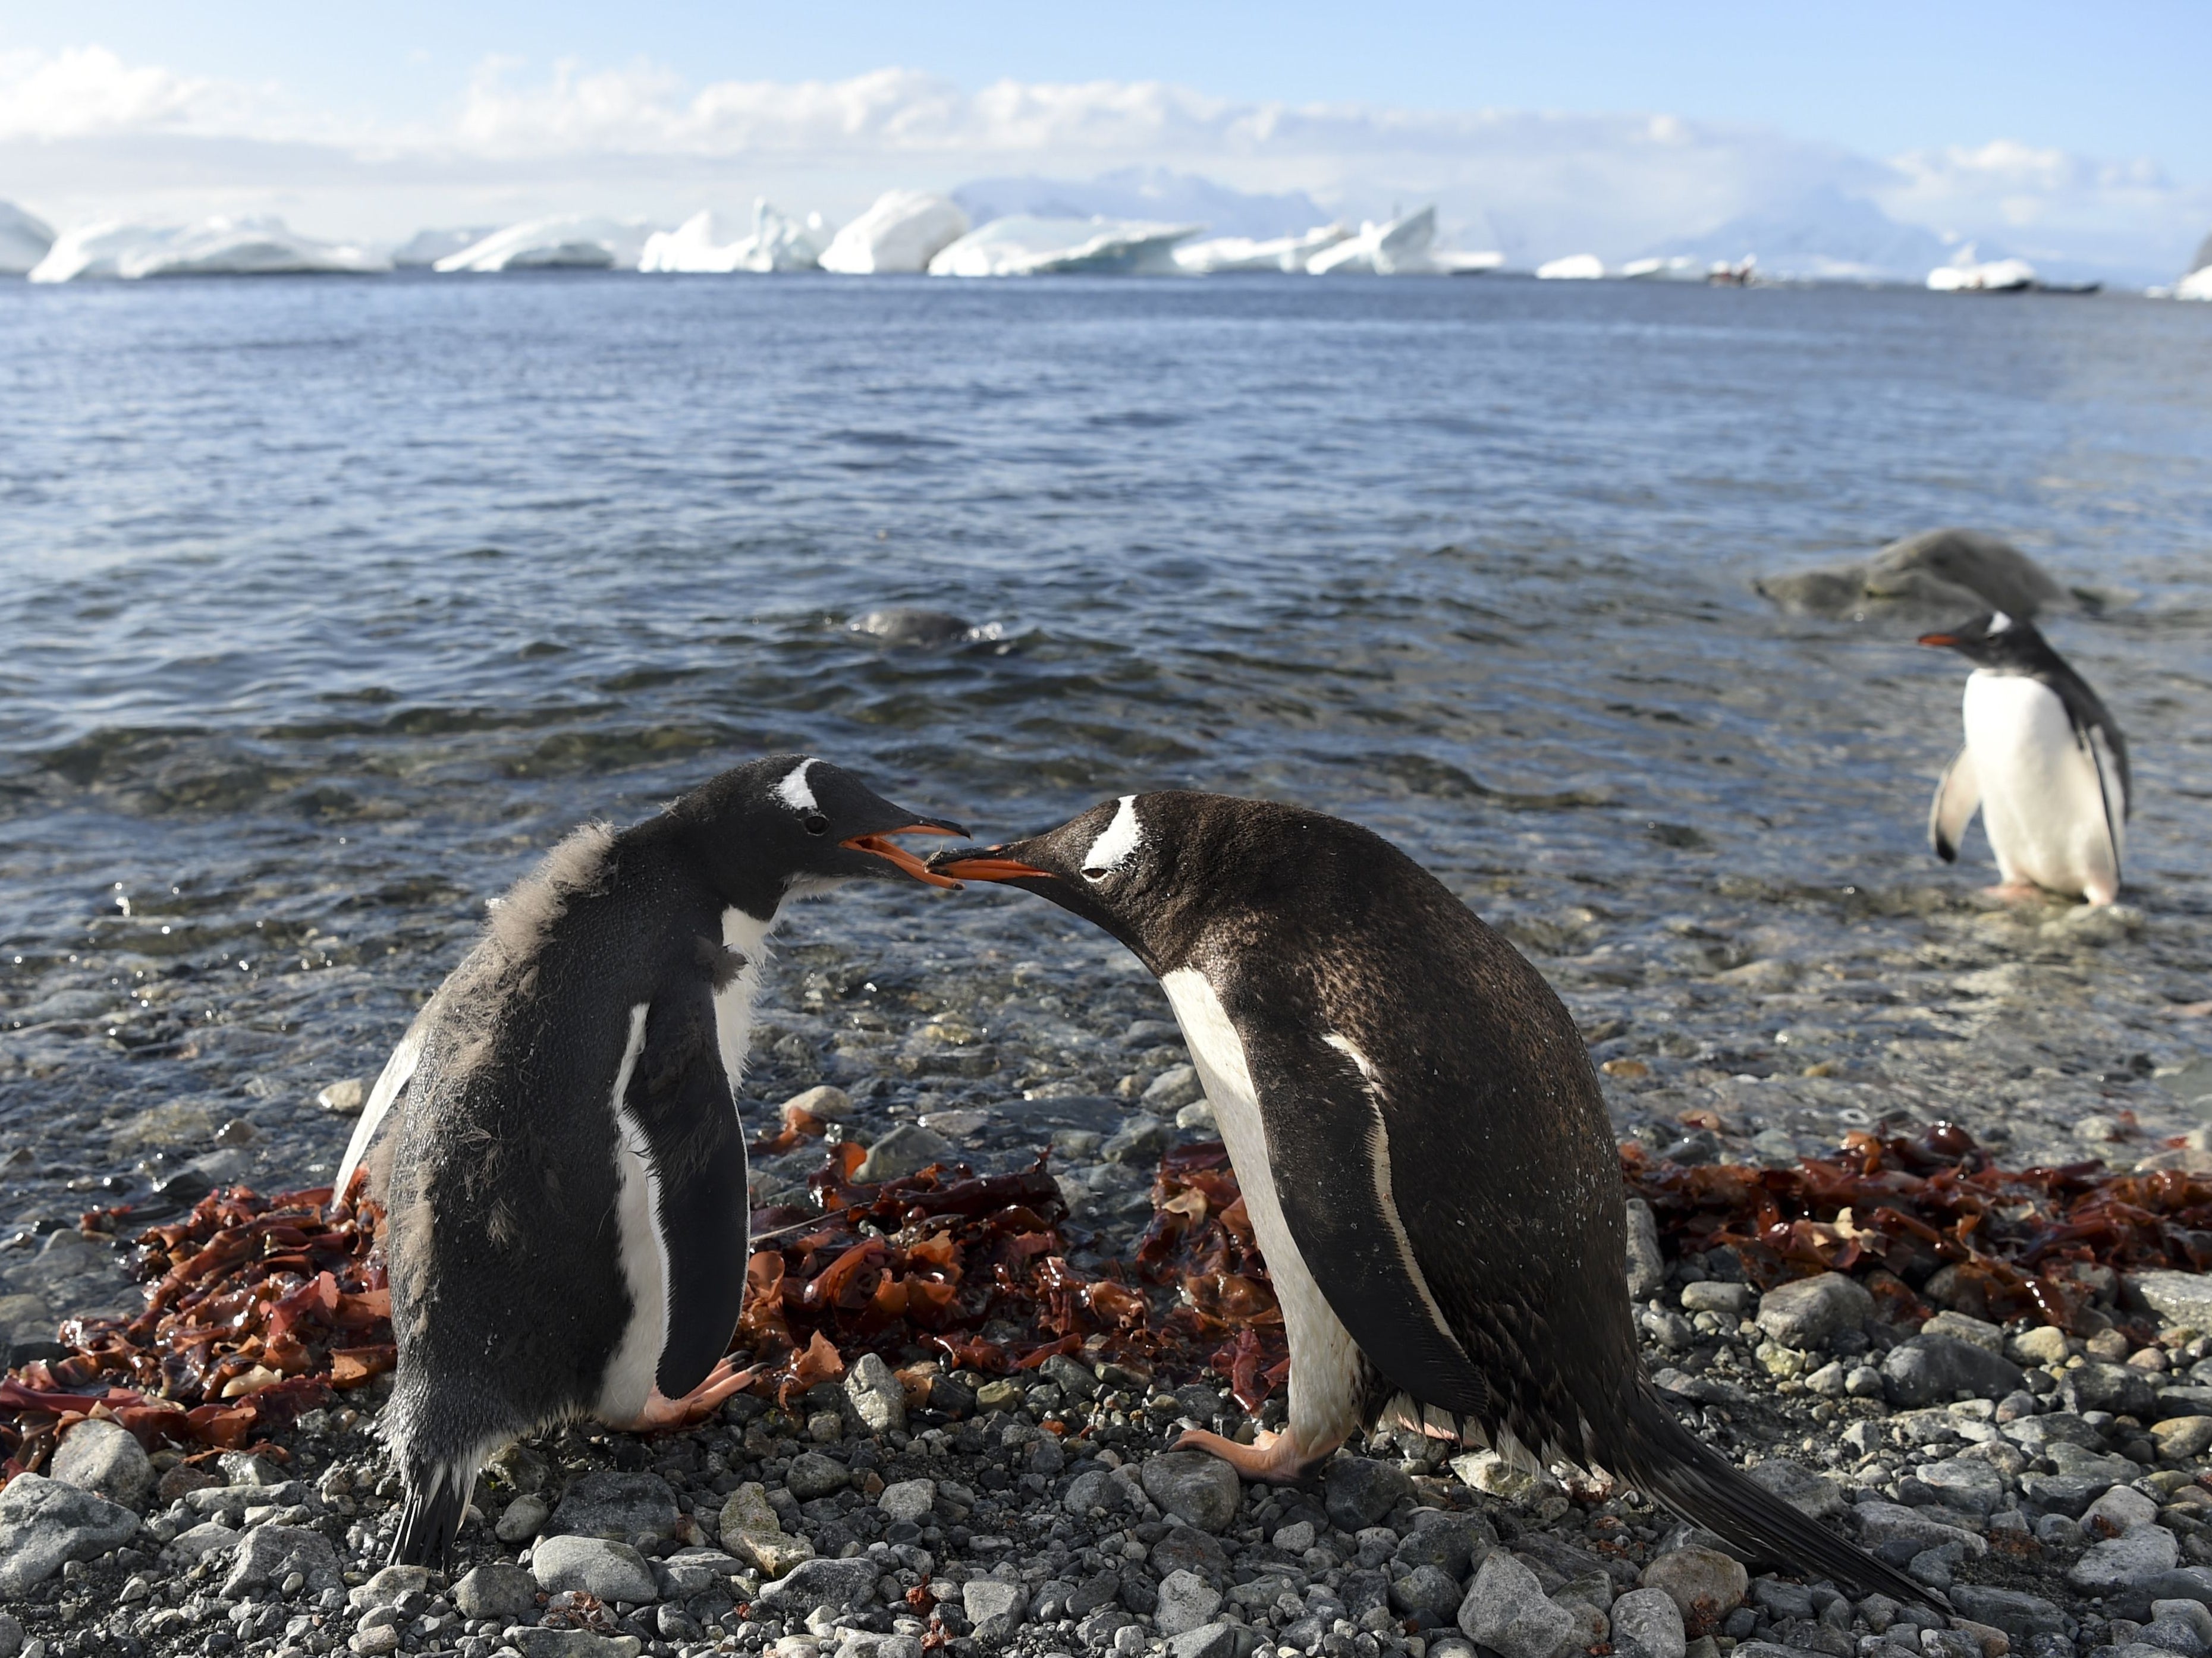 Marine environment around Antarctica supports animal life including penguins, seals, whales and albatrosses, the WWF says